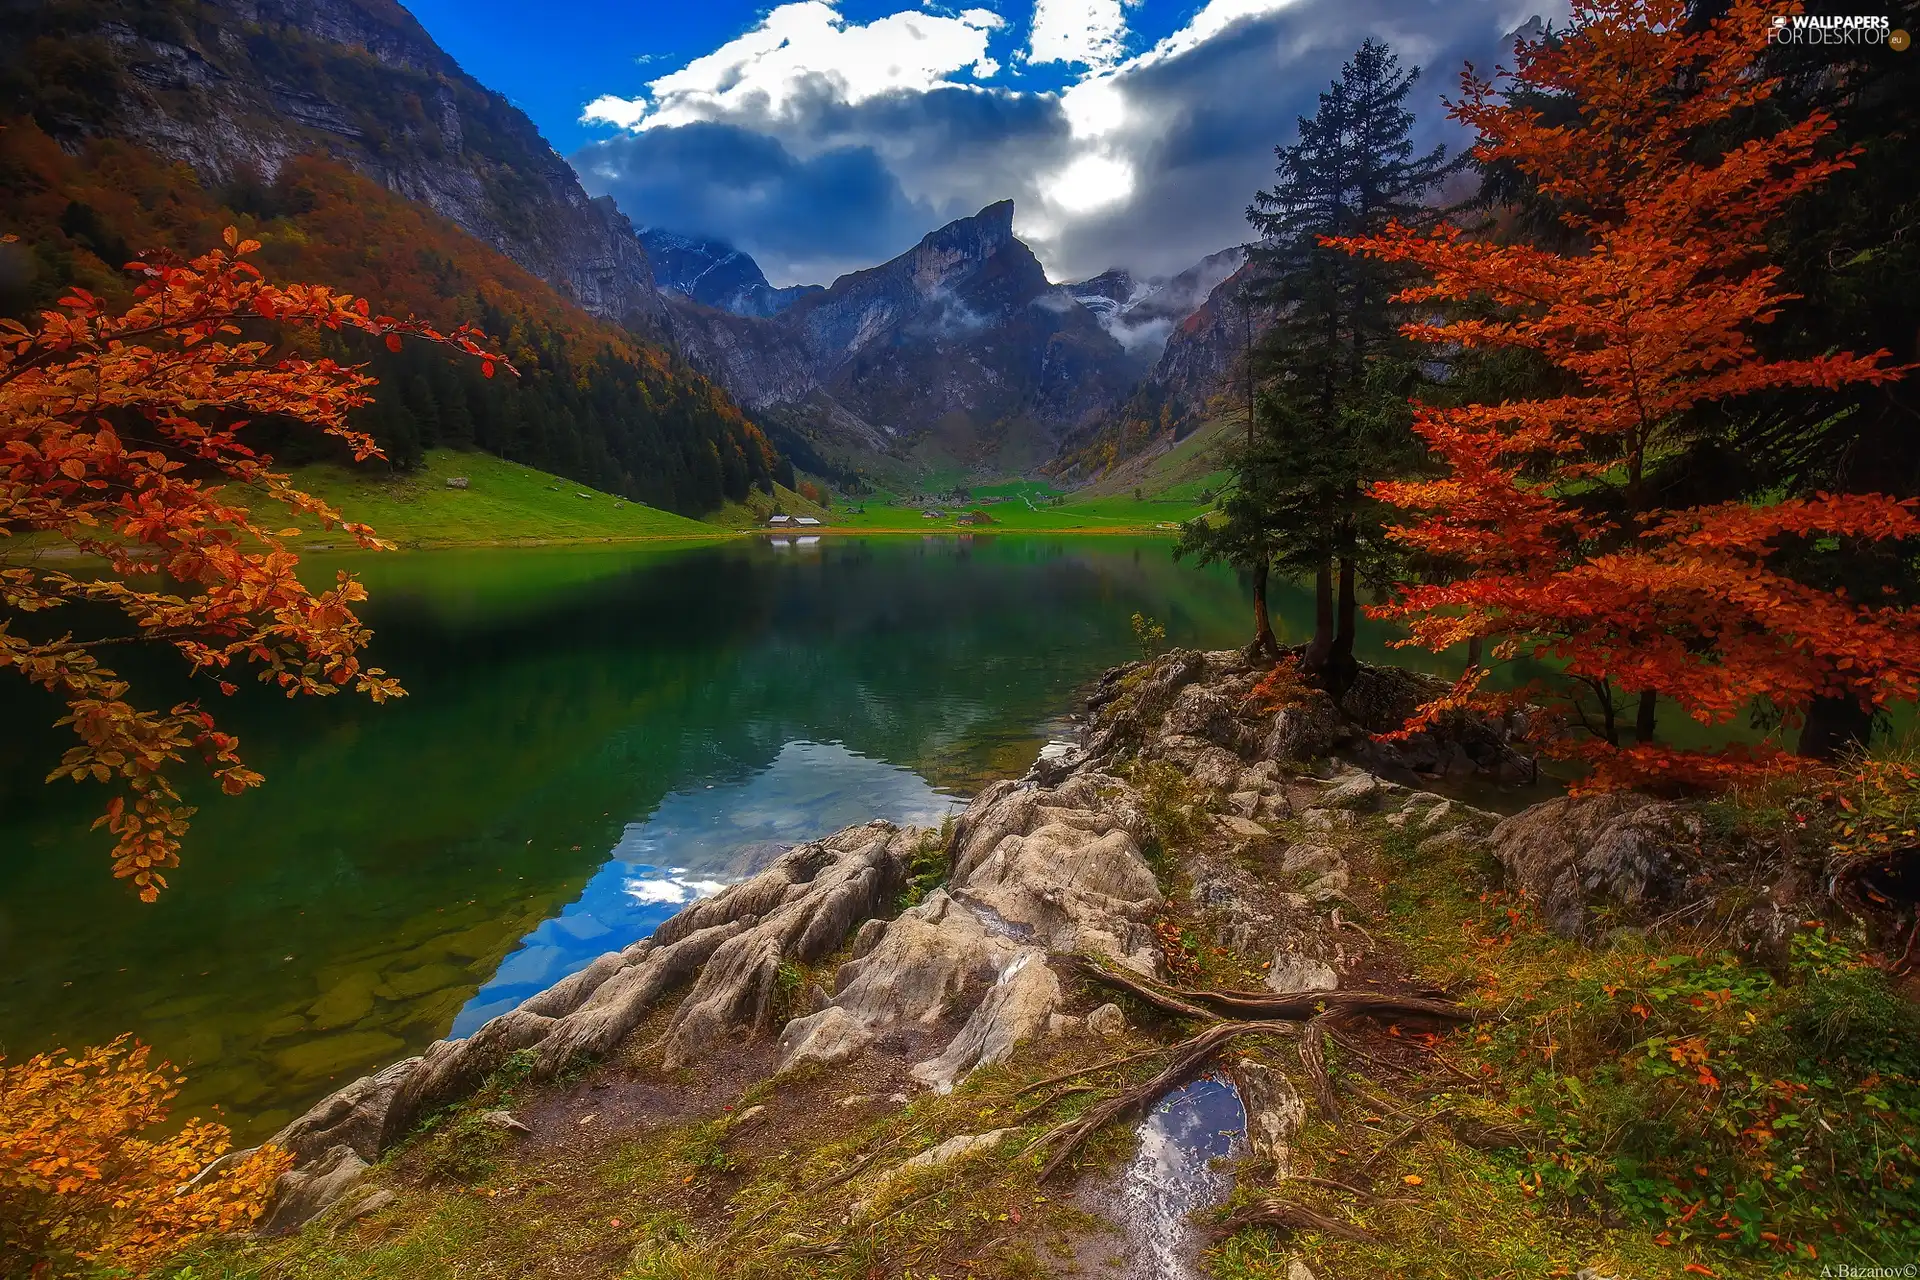 Houses, Alps Mountains, viewes, car in the meadow, lake, trees, autumn